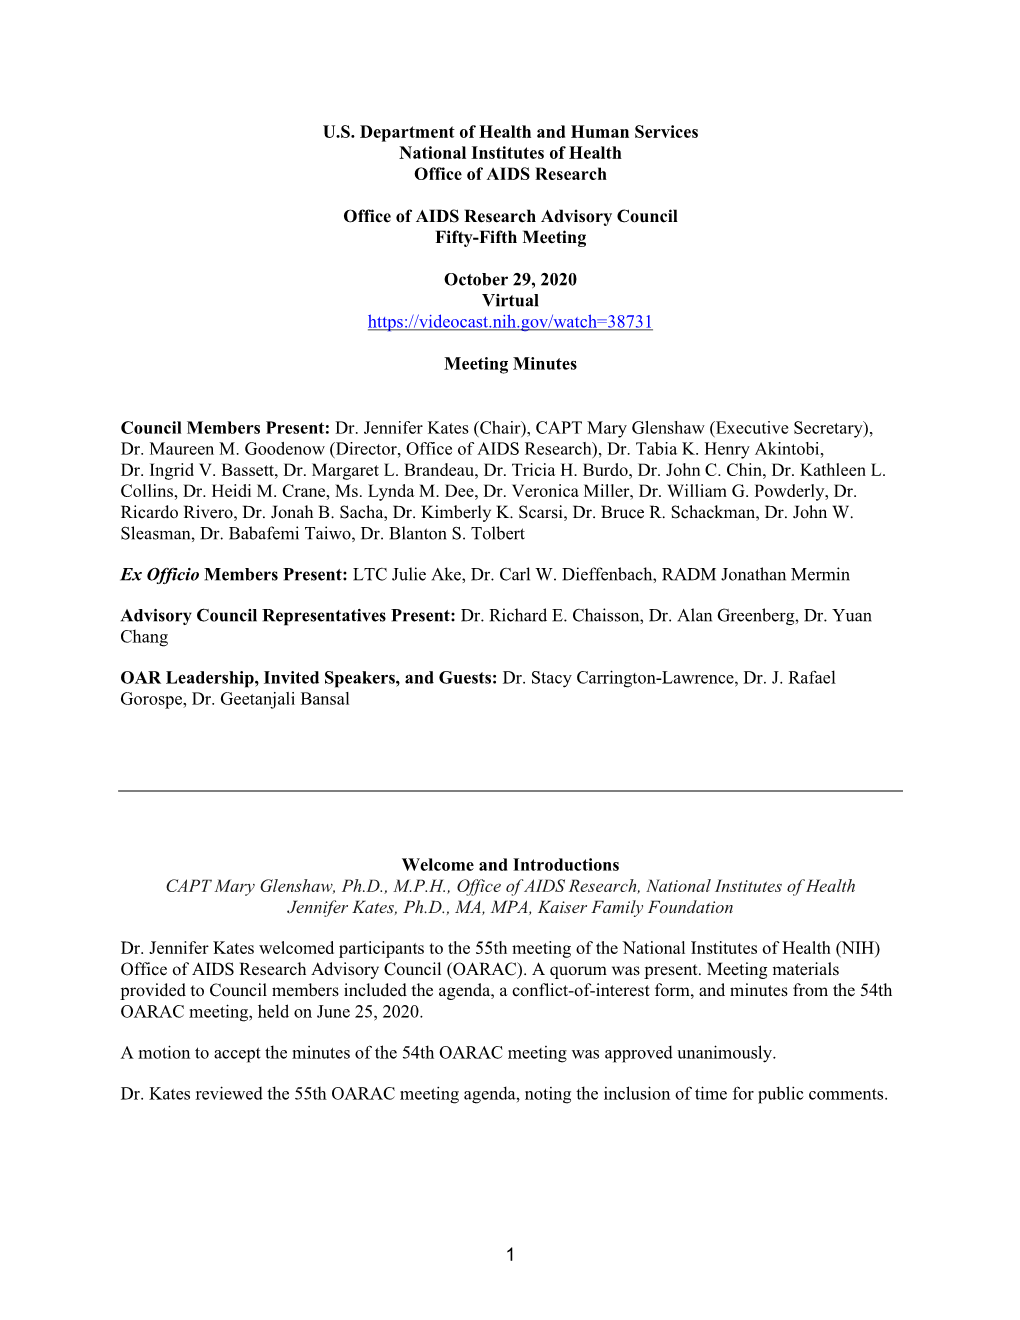 Office of AIDS Research Advisory Council Fifty-Fifth Meeting Minutes